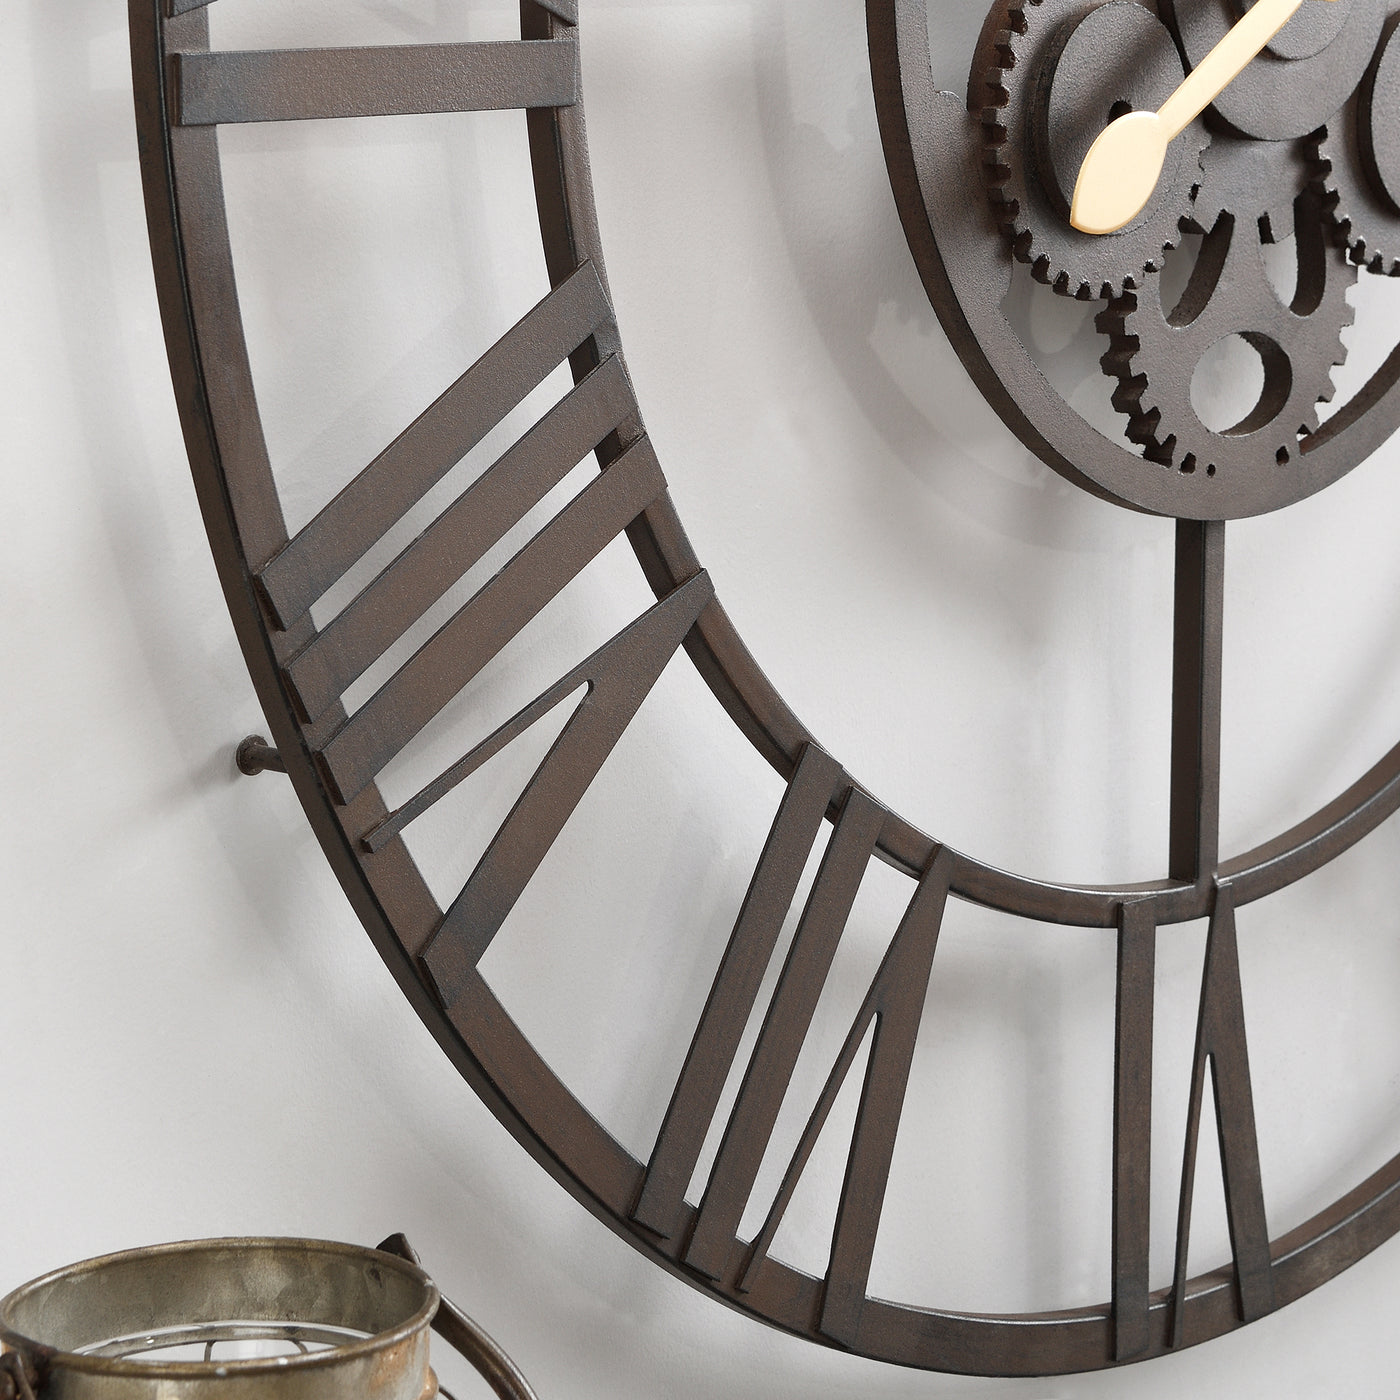 FirsTime & Co. Dark Brown Rutherford Gears Wall Clock, Industrial Style, Made of Metal